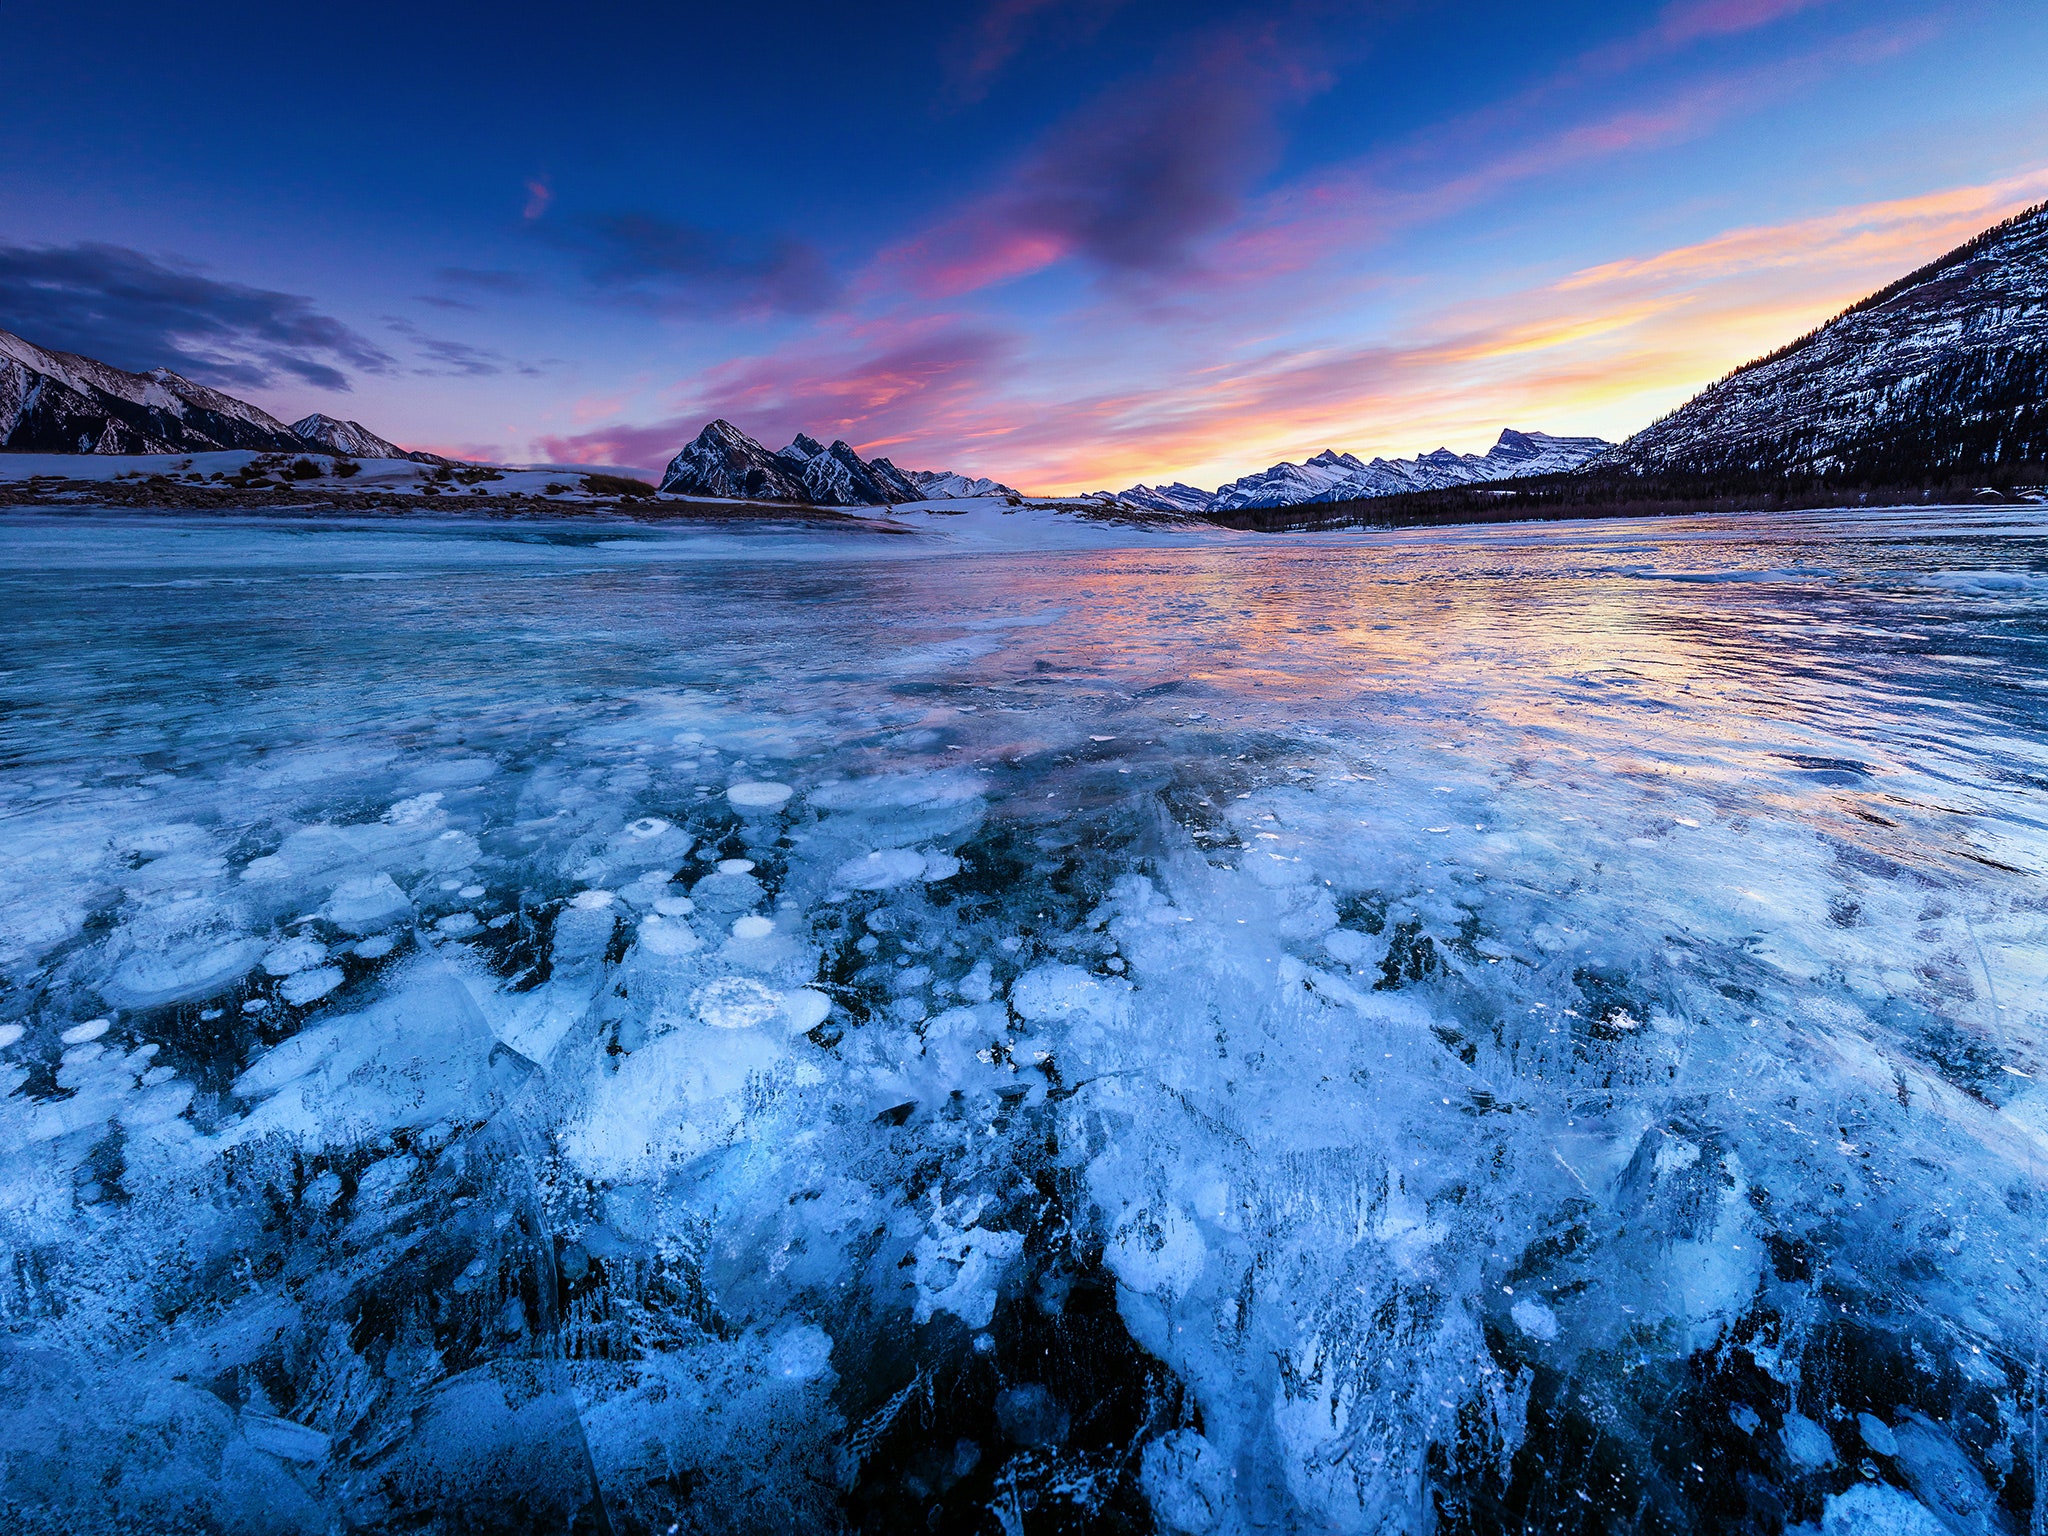 10 Frozen Lakes That Will Restore Your Faith in Winter